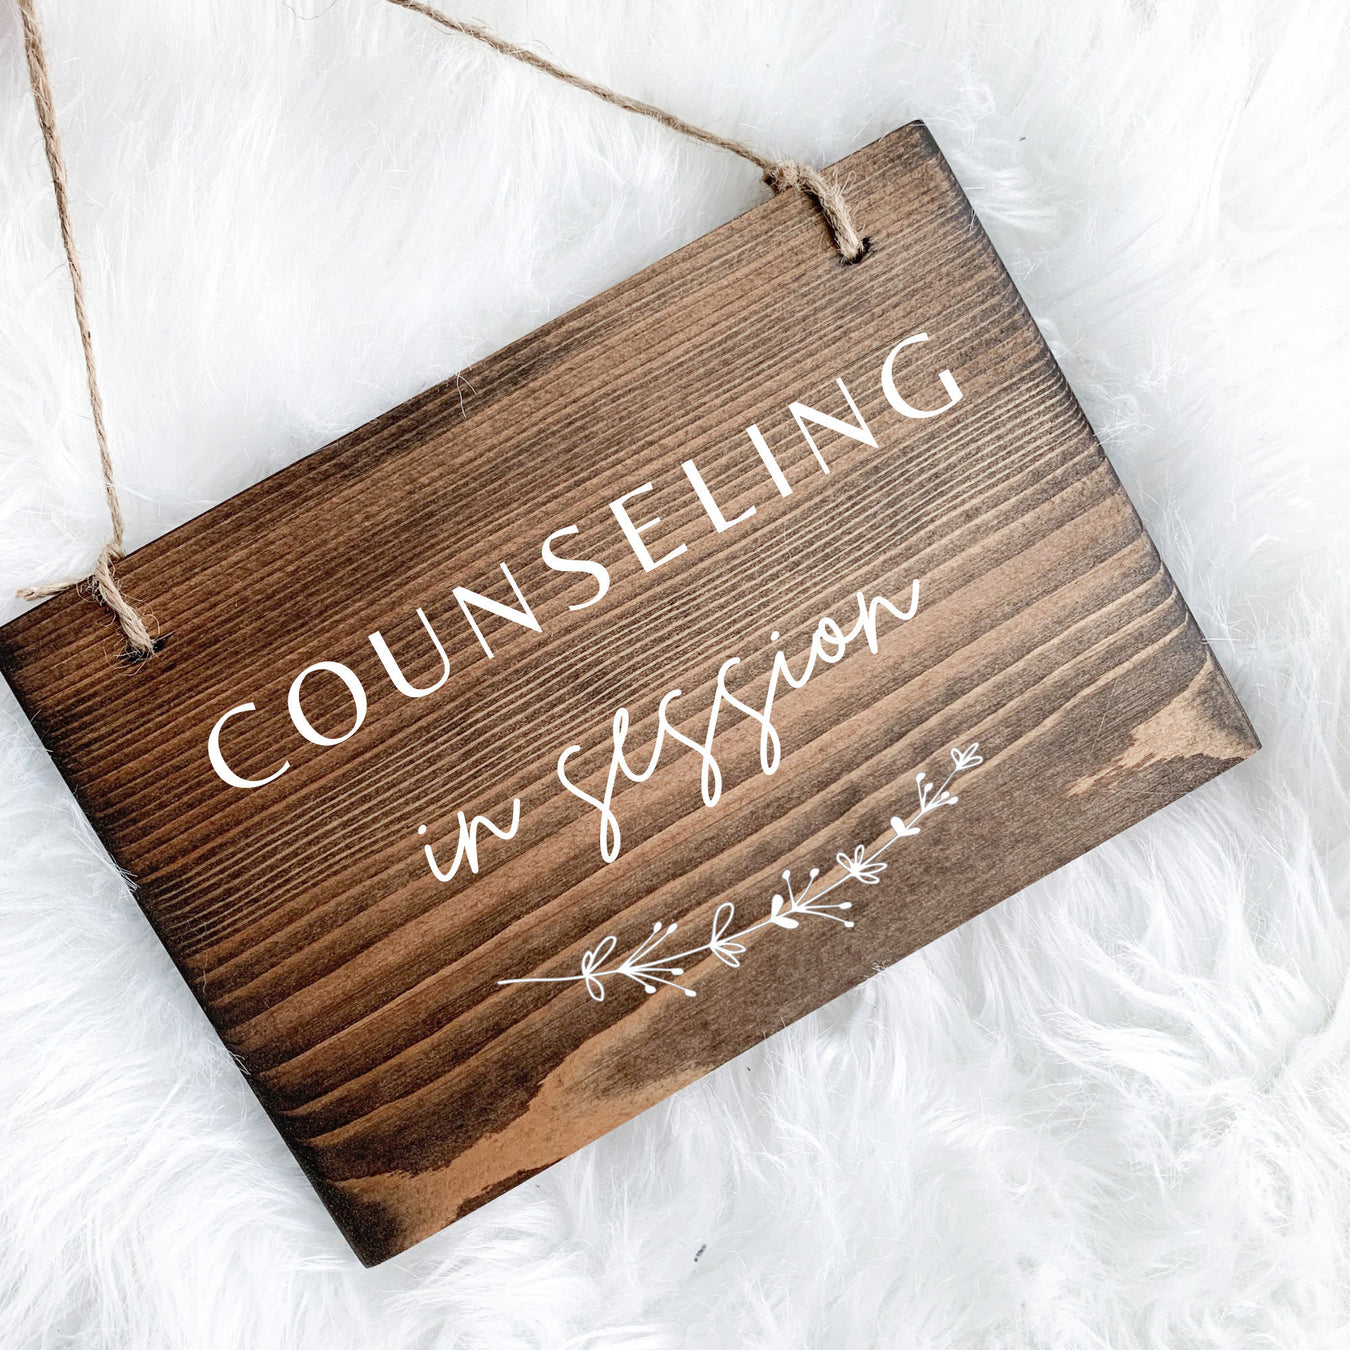 Counselling in Session | Counseling in Session | Therapy in Session Signs